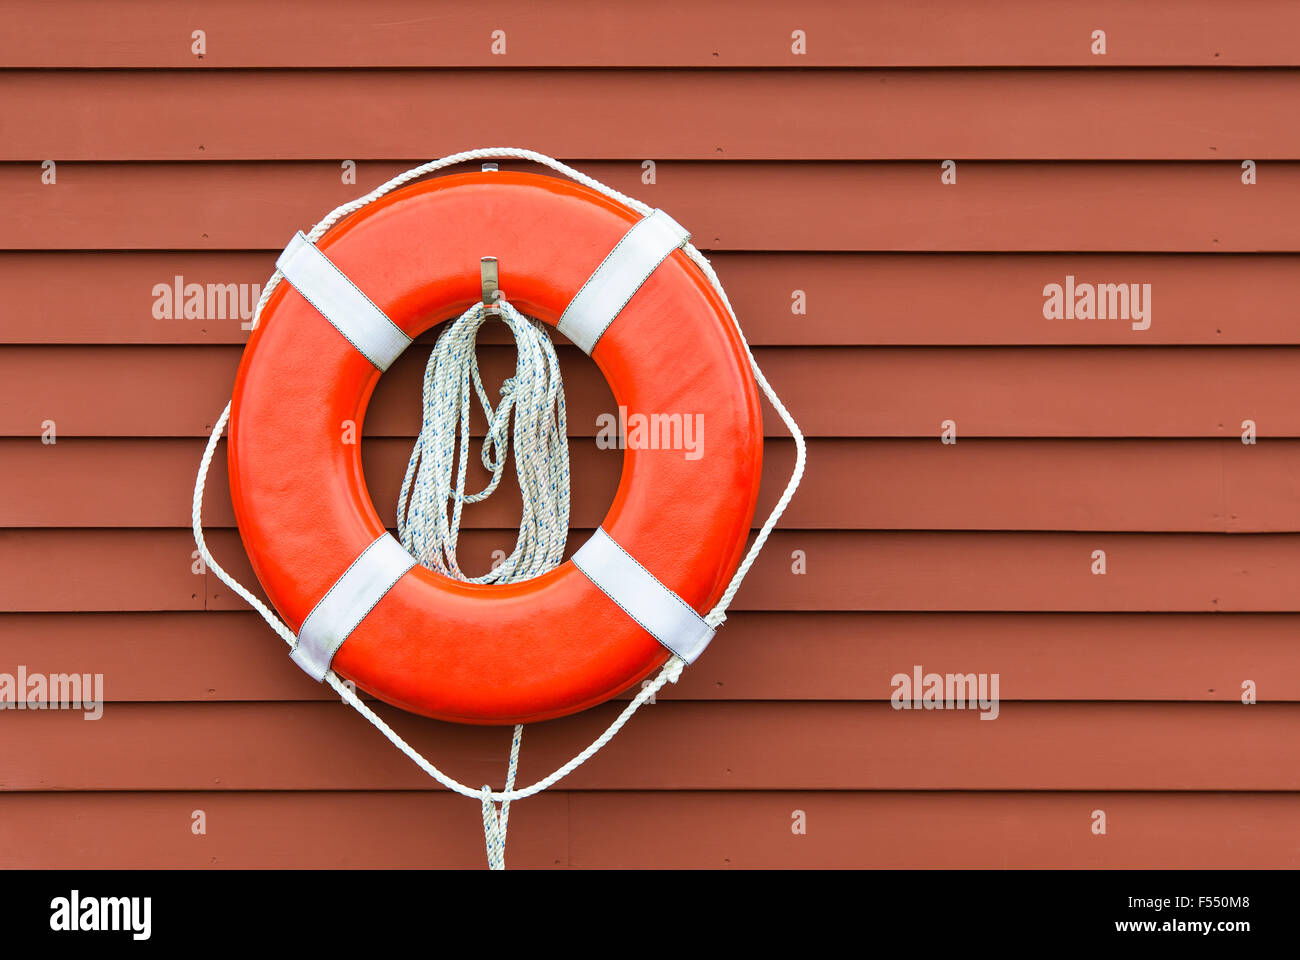 Ring buoy hanging against red wooden wall background Stock Photo